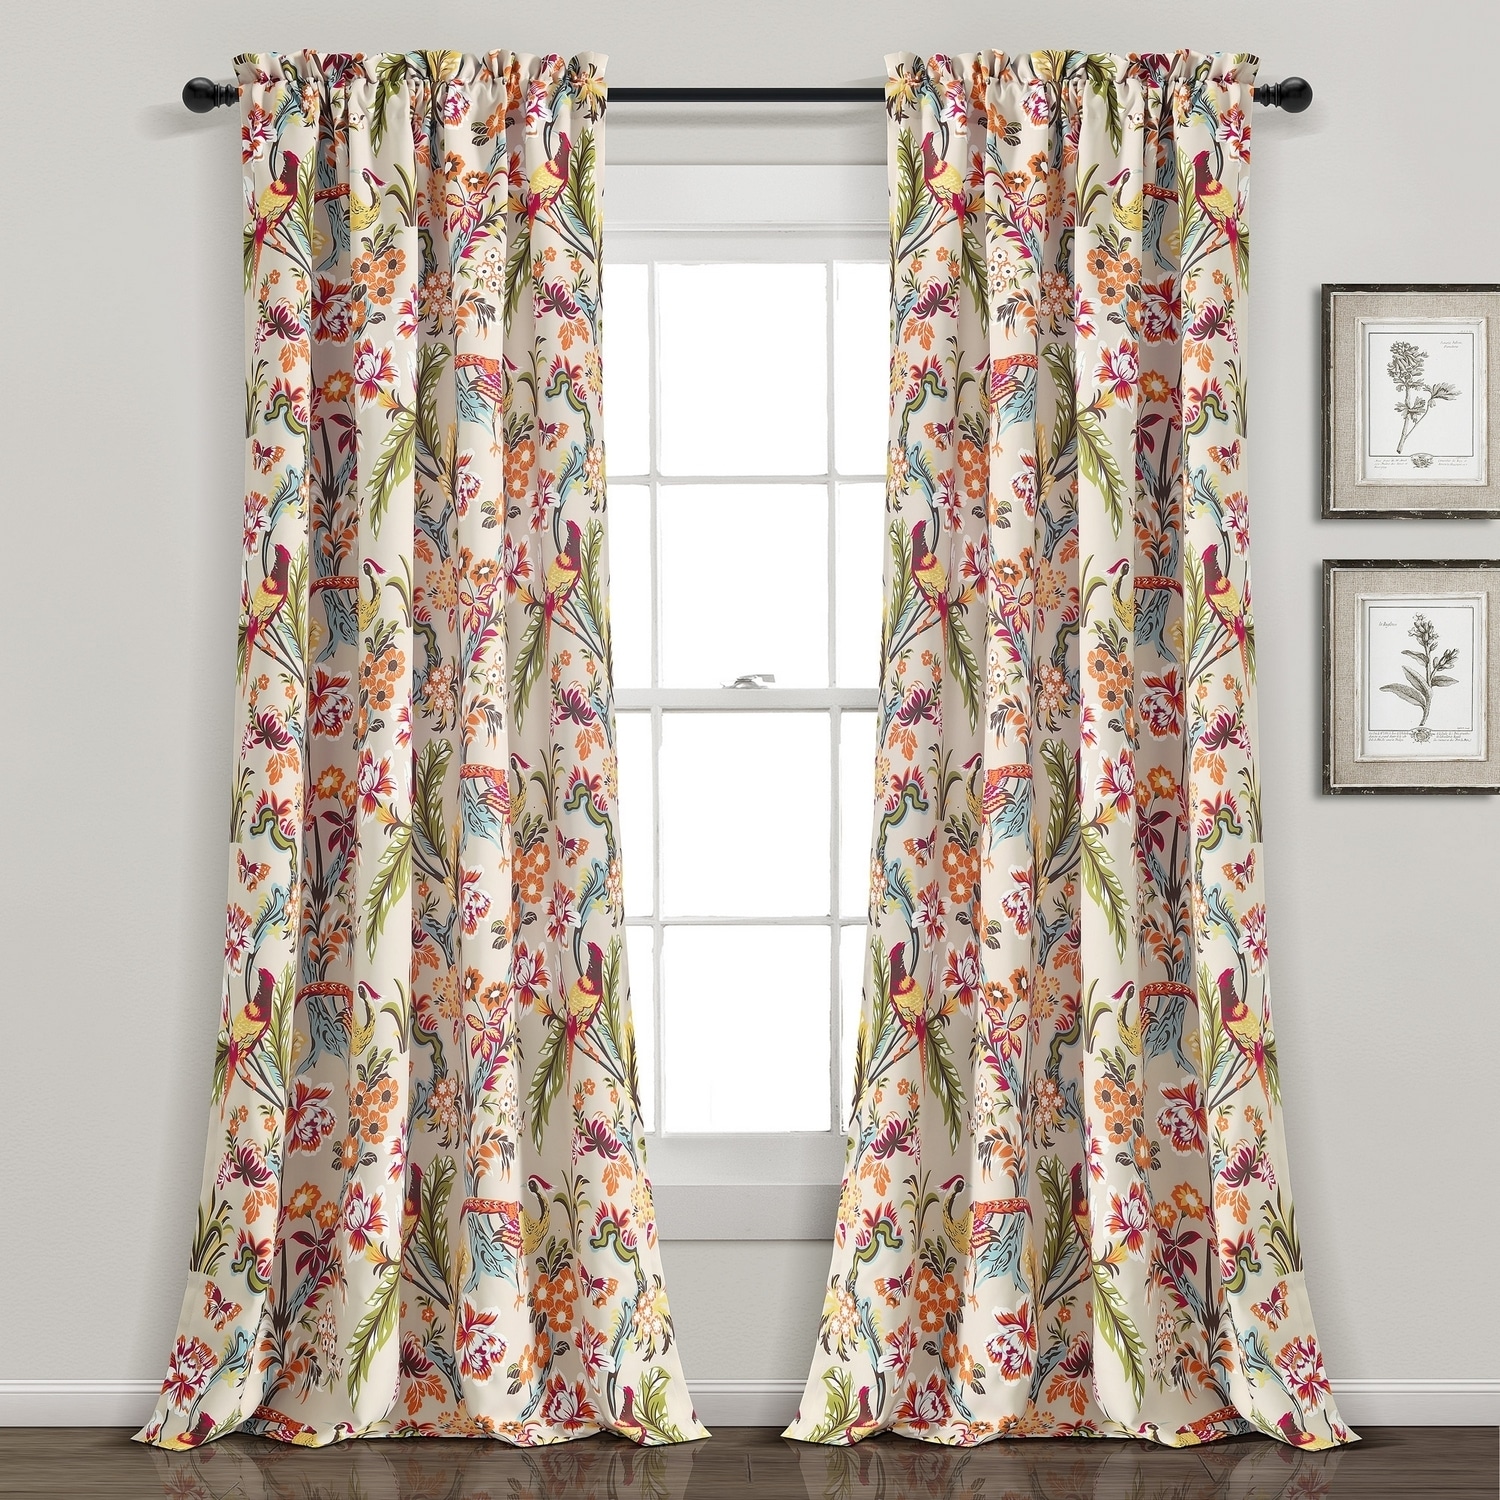 Lush Decor Pair Pocket Light in at Panel & Neutral Rod department 84-in Curtains Filtering the Drapes Curtain